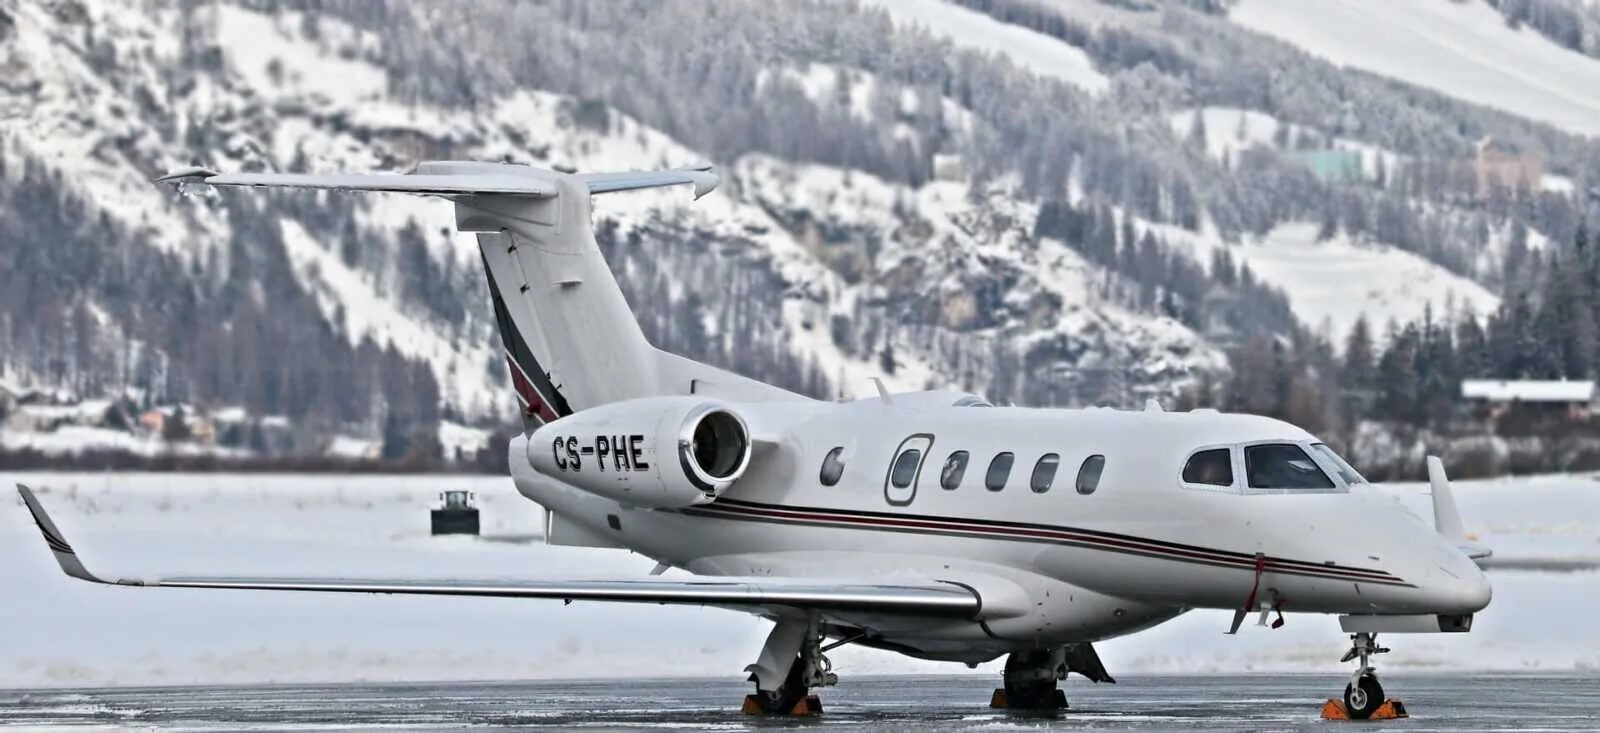 Possibilities of a private jet